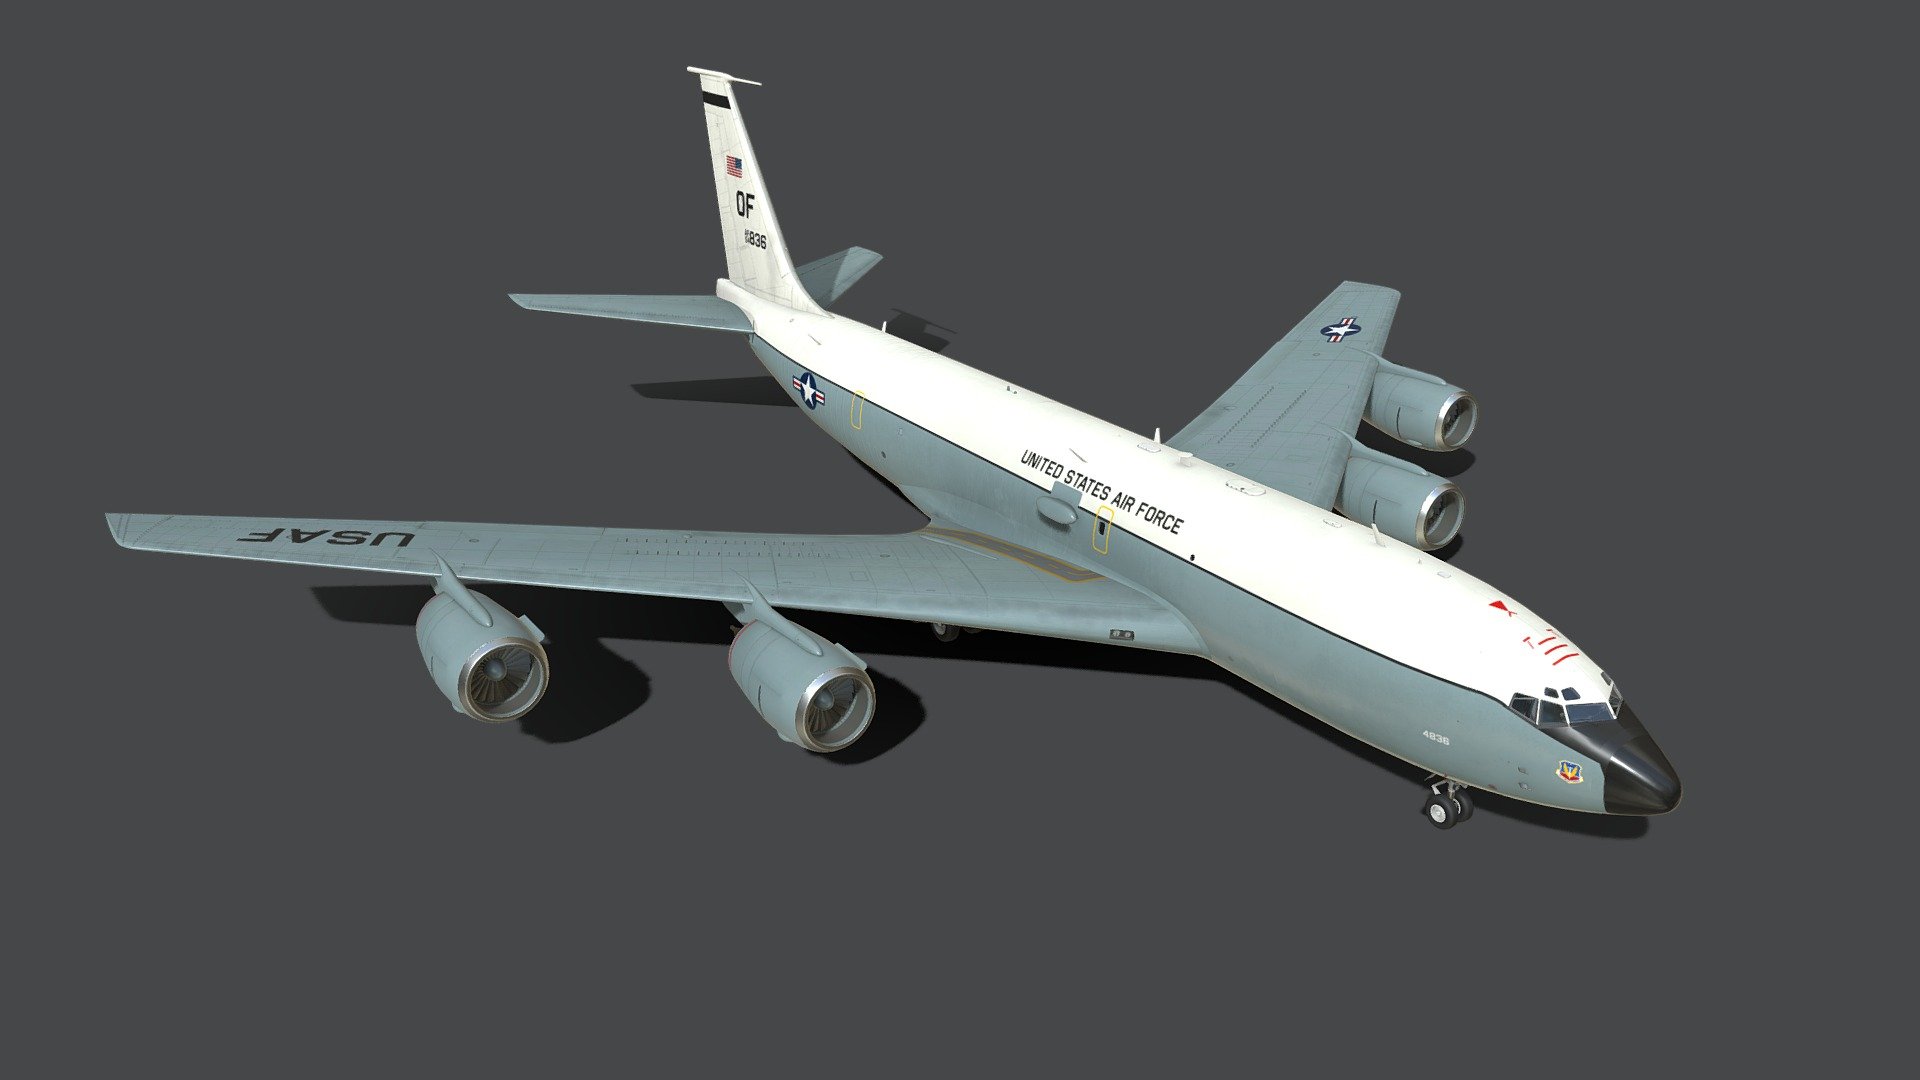 The WC-135 Constant Phoenix is a special-purpose aircraft derived from the Boeing C-135 Stratolifter and used by the United States Air Force. Its mission is to collect samples from the atmosphere for the purpose of detecting and identifying nuclear explosions. It is also informally referred to as the &ldquo;weather bird